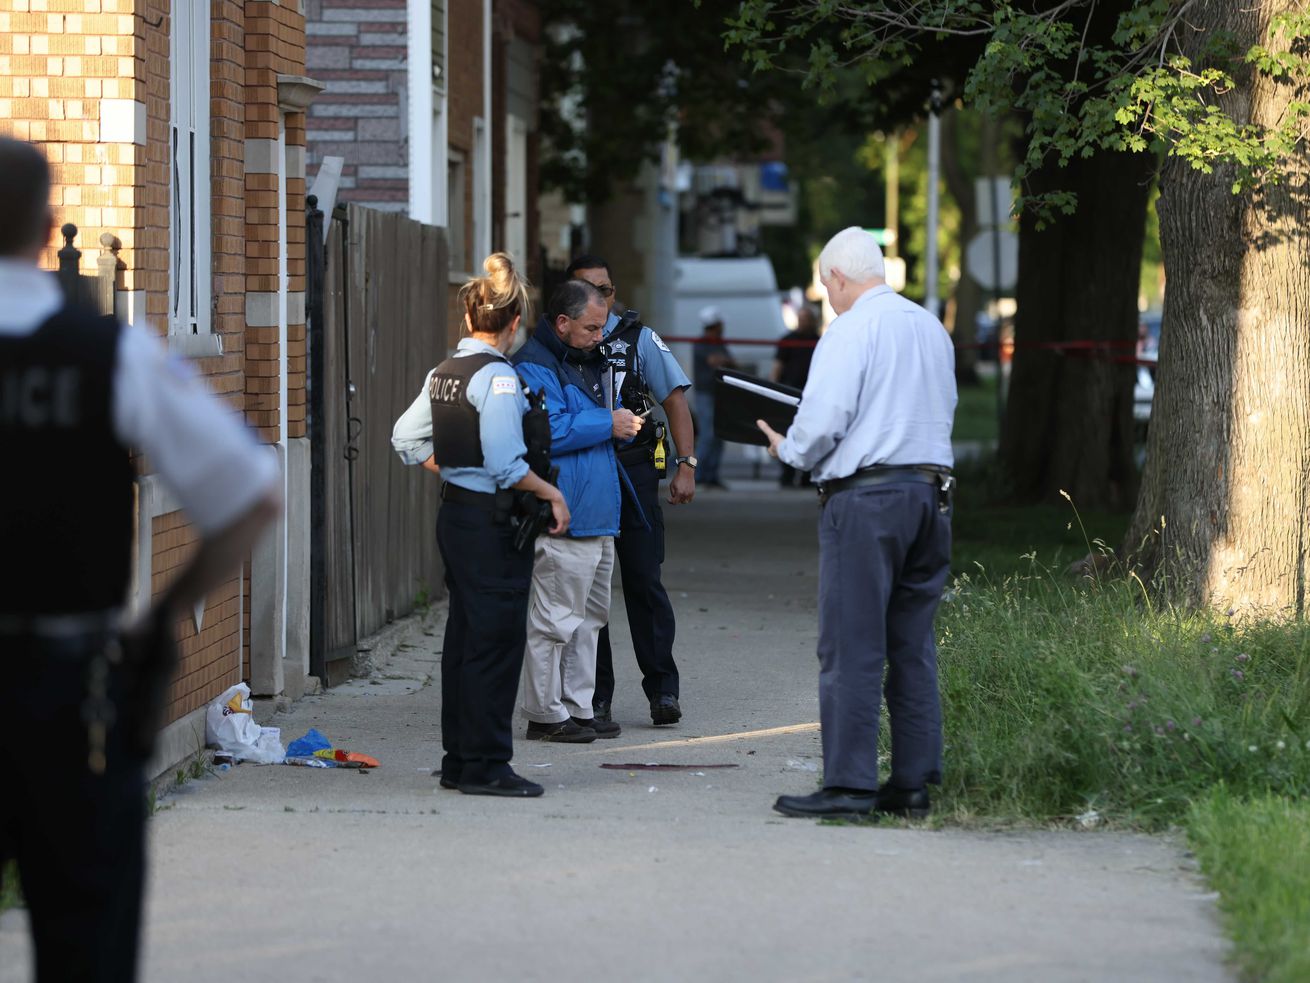 A 14-year-old girl shot in the head Wednesday in Back of the Yards is another victim of Chicago’s gang violence.